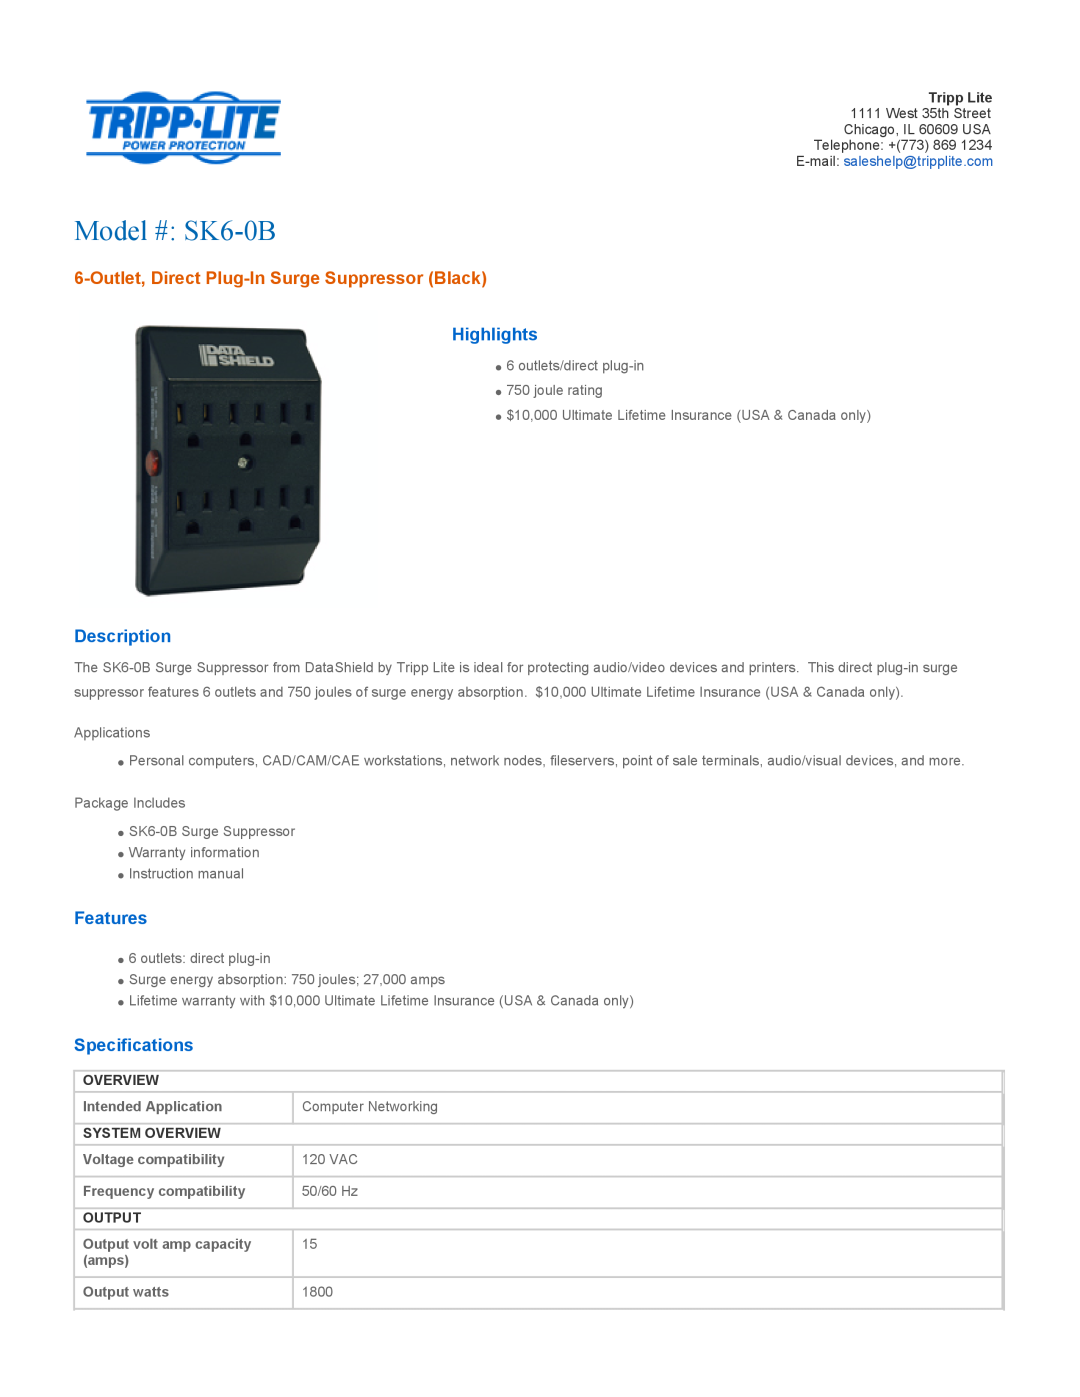 Tripp Lite specifications System Overview, Output, Model # SK6-0B, Outlet, Direct Plug-In Surge Suppressor Black 